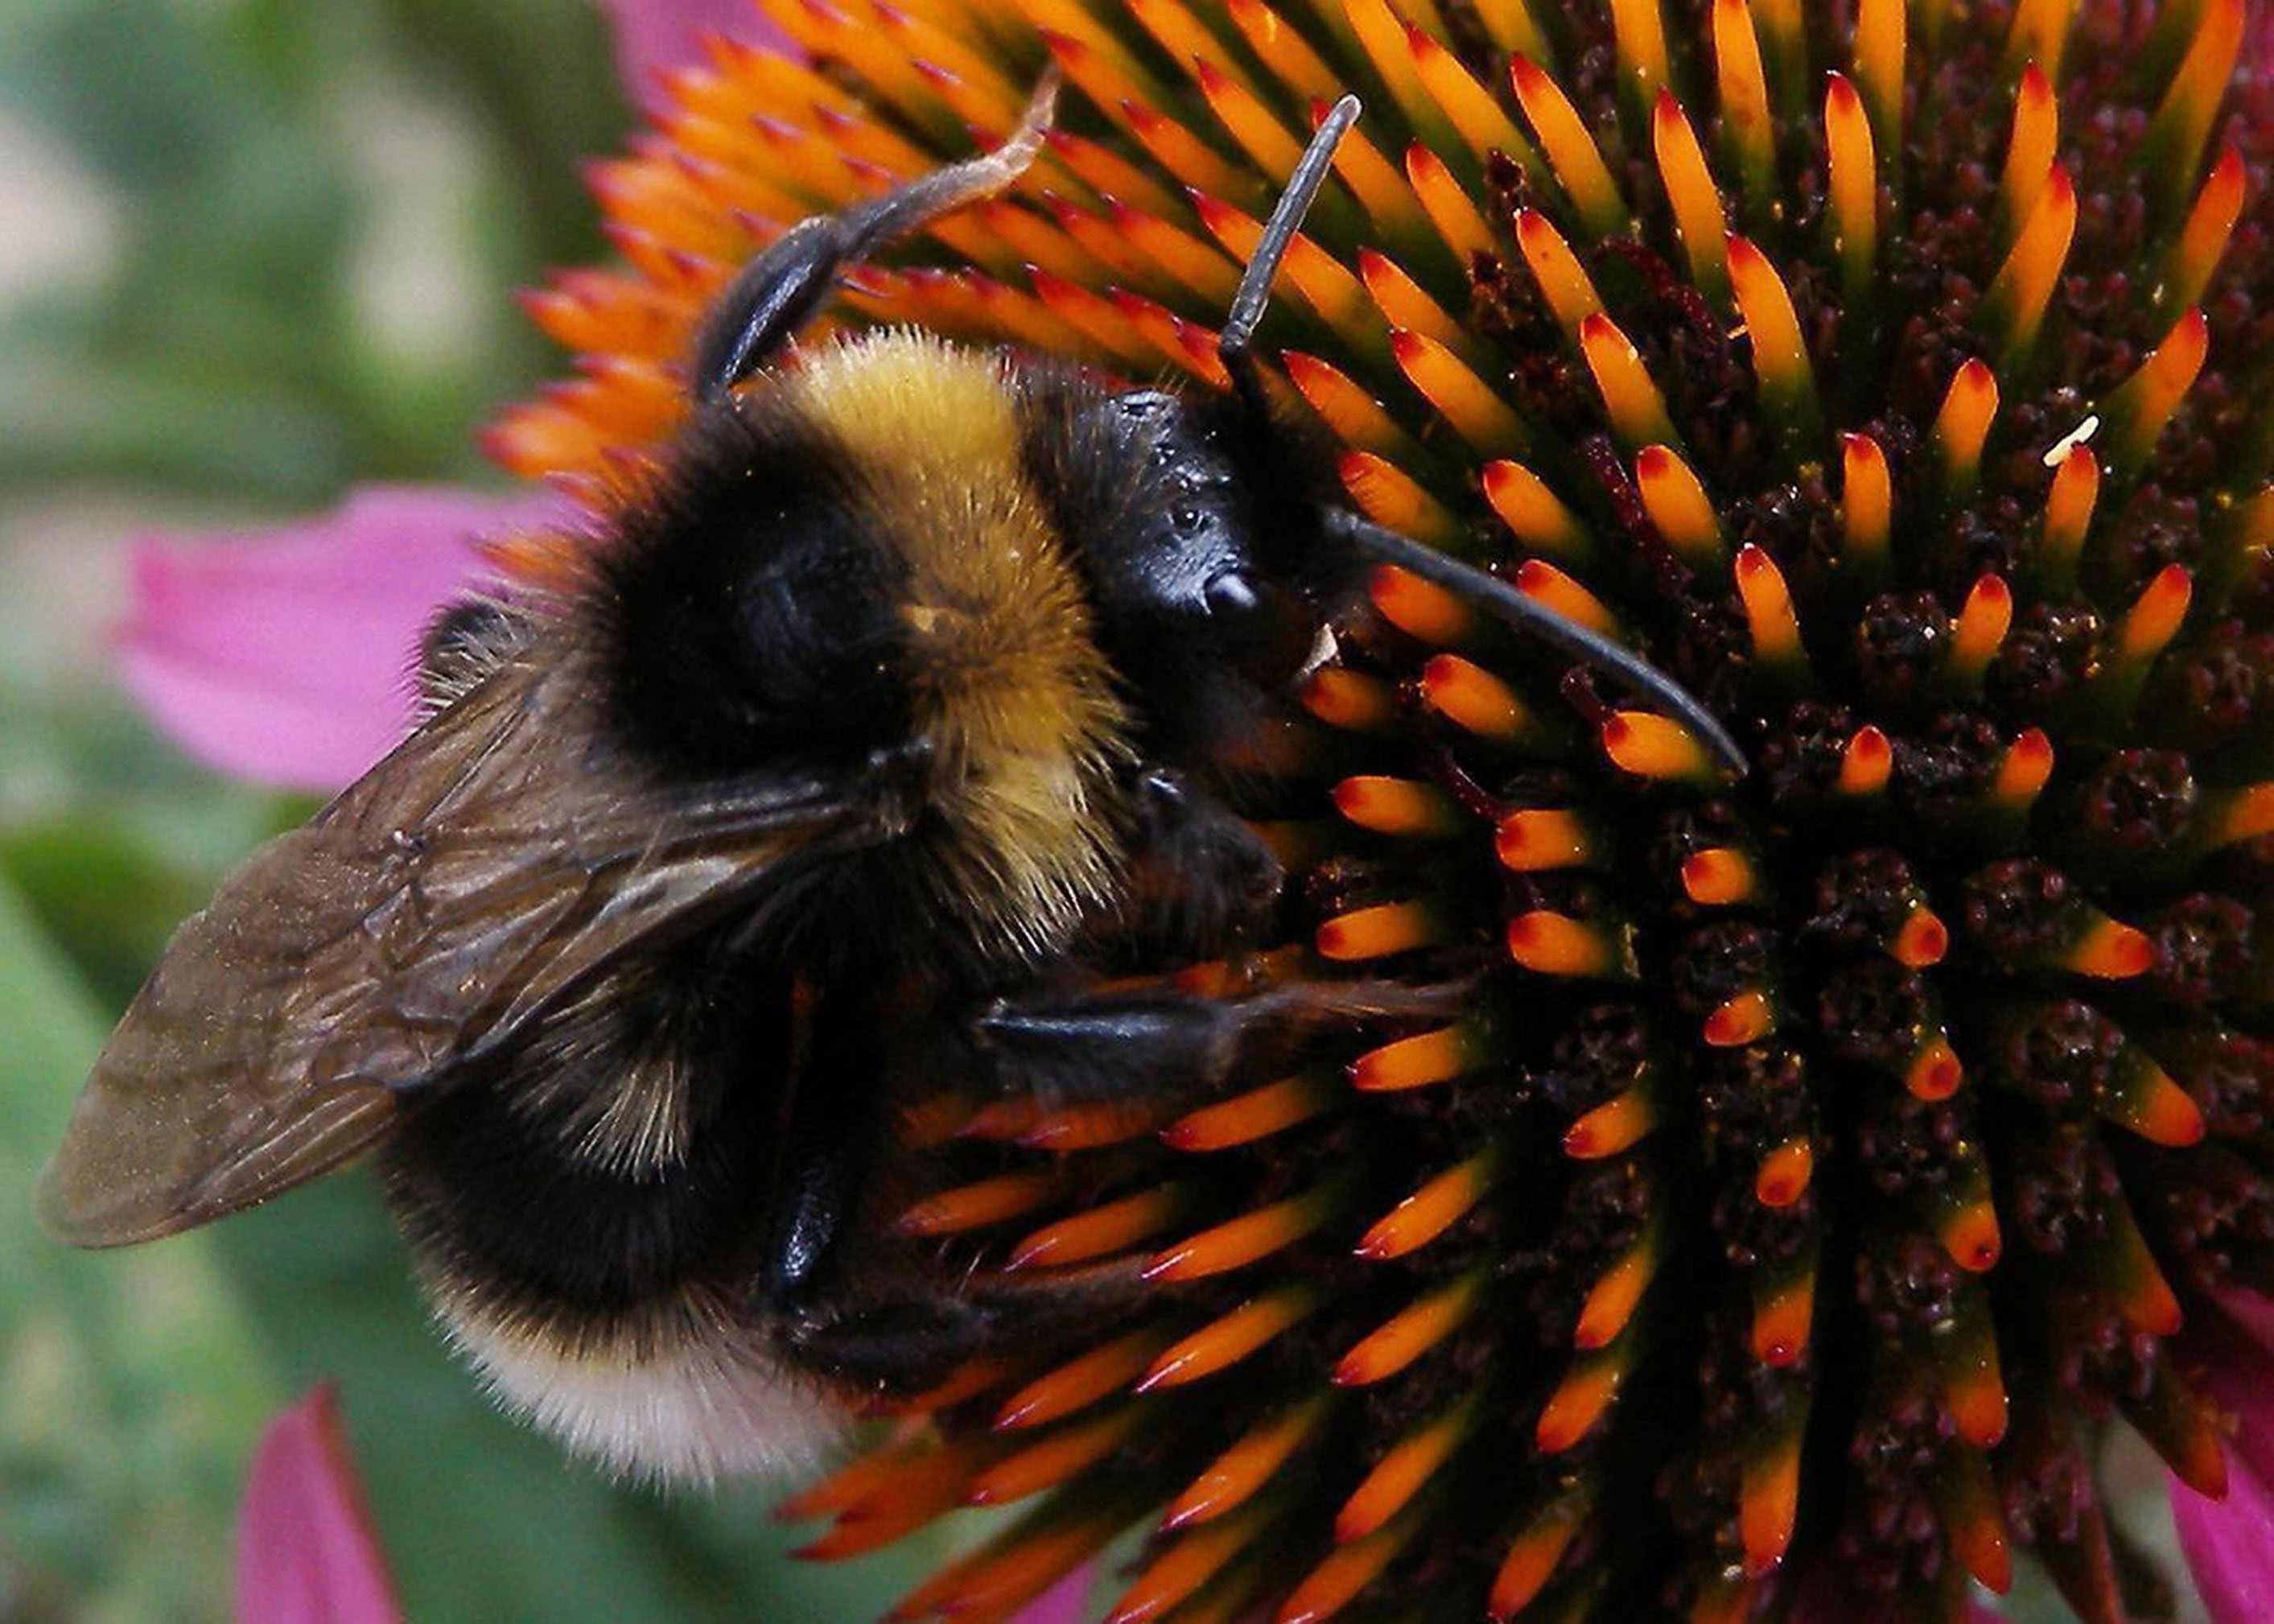 A bumblebee at work. Researchers now believe certain pesticides are stunting their ability to pollinate.